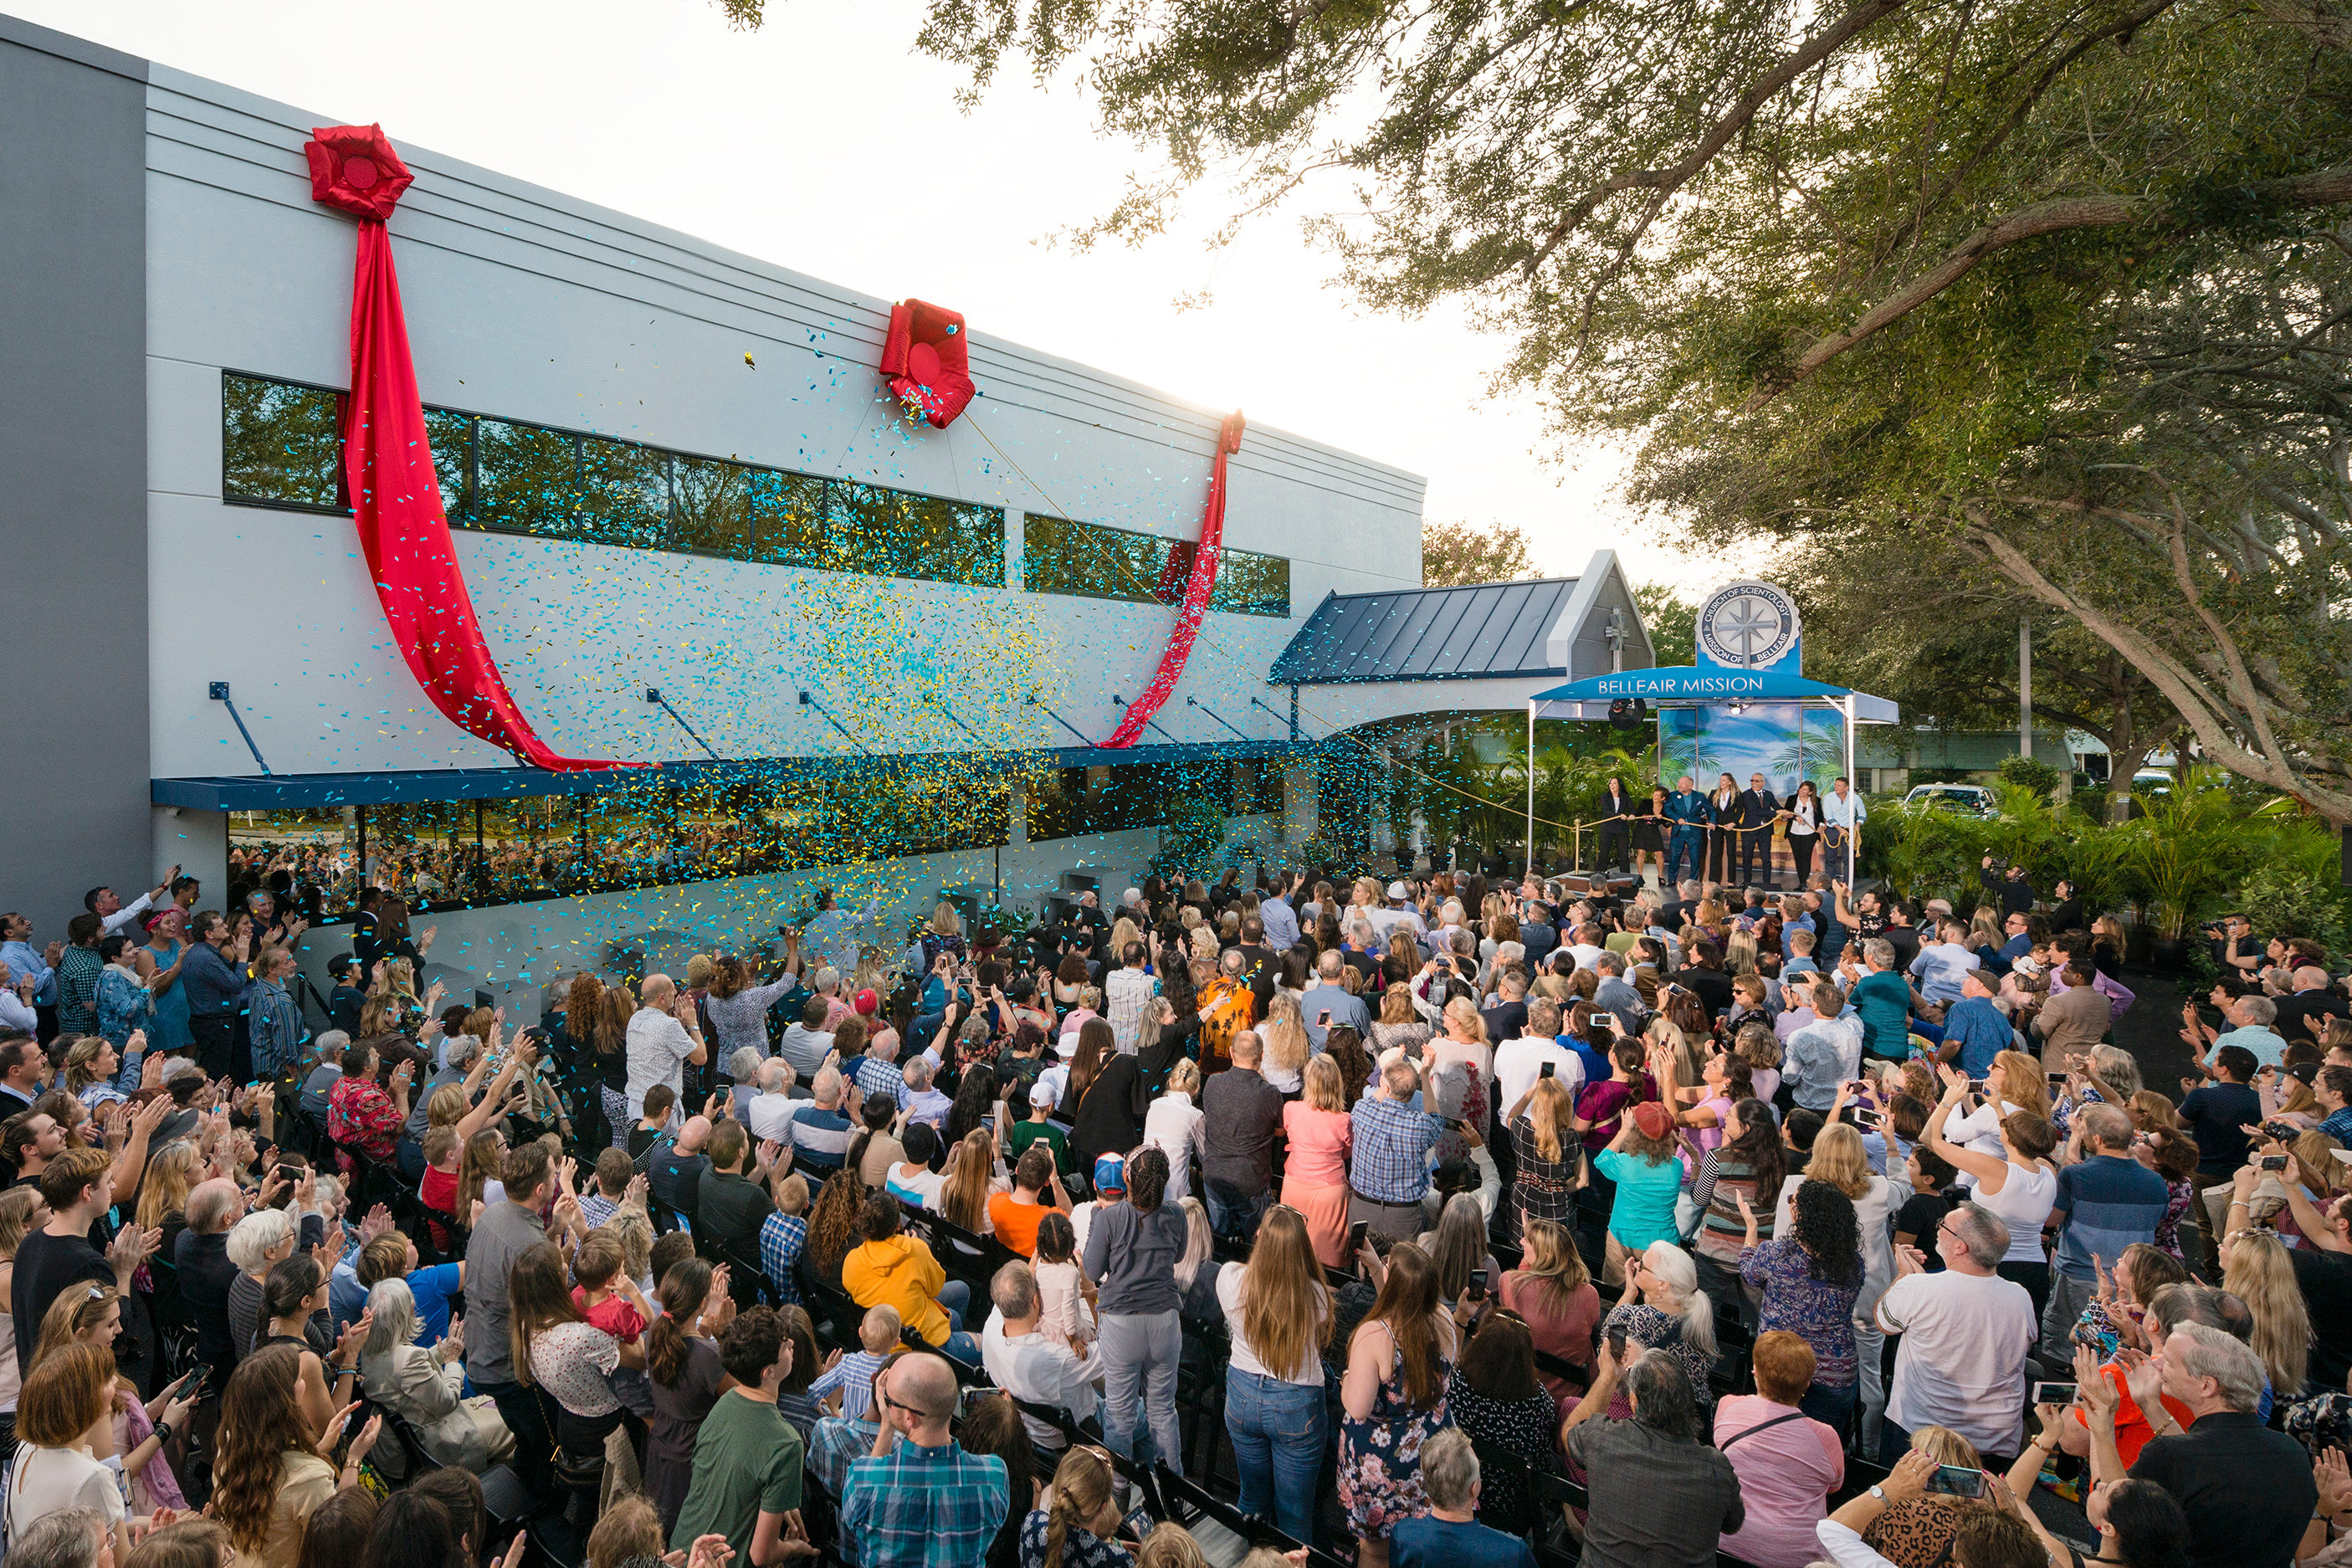 Scientology mission Belleair opening ribbon pull